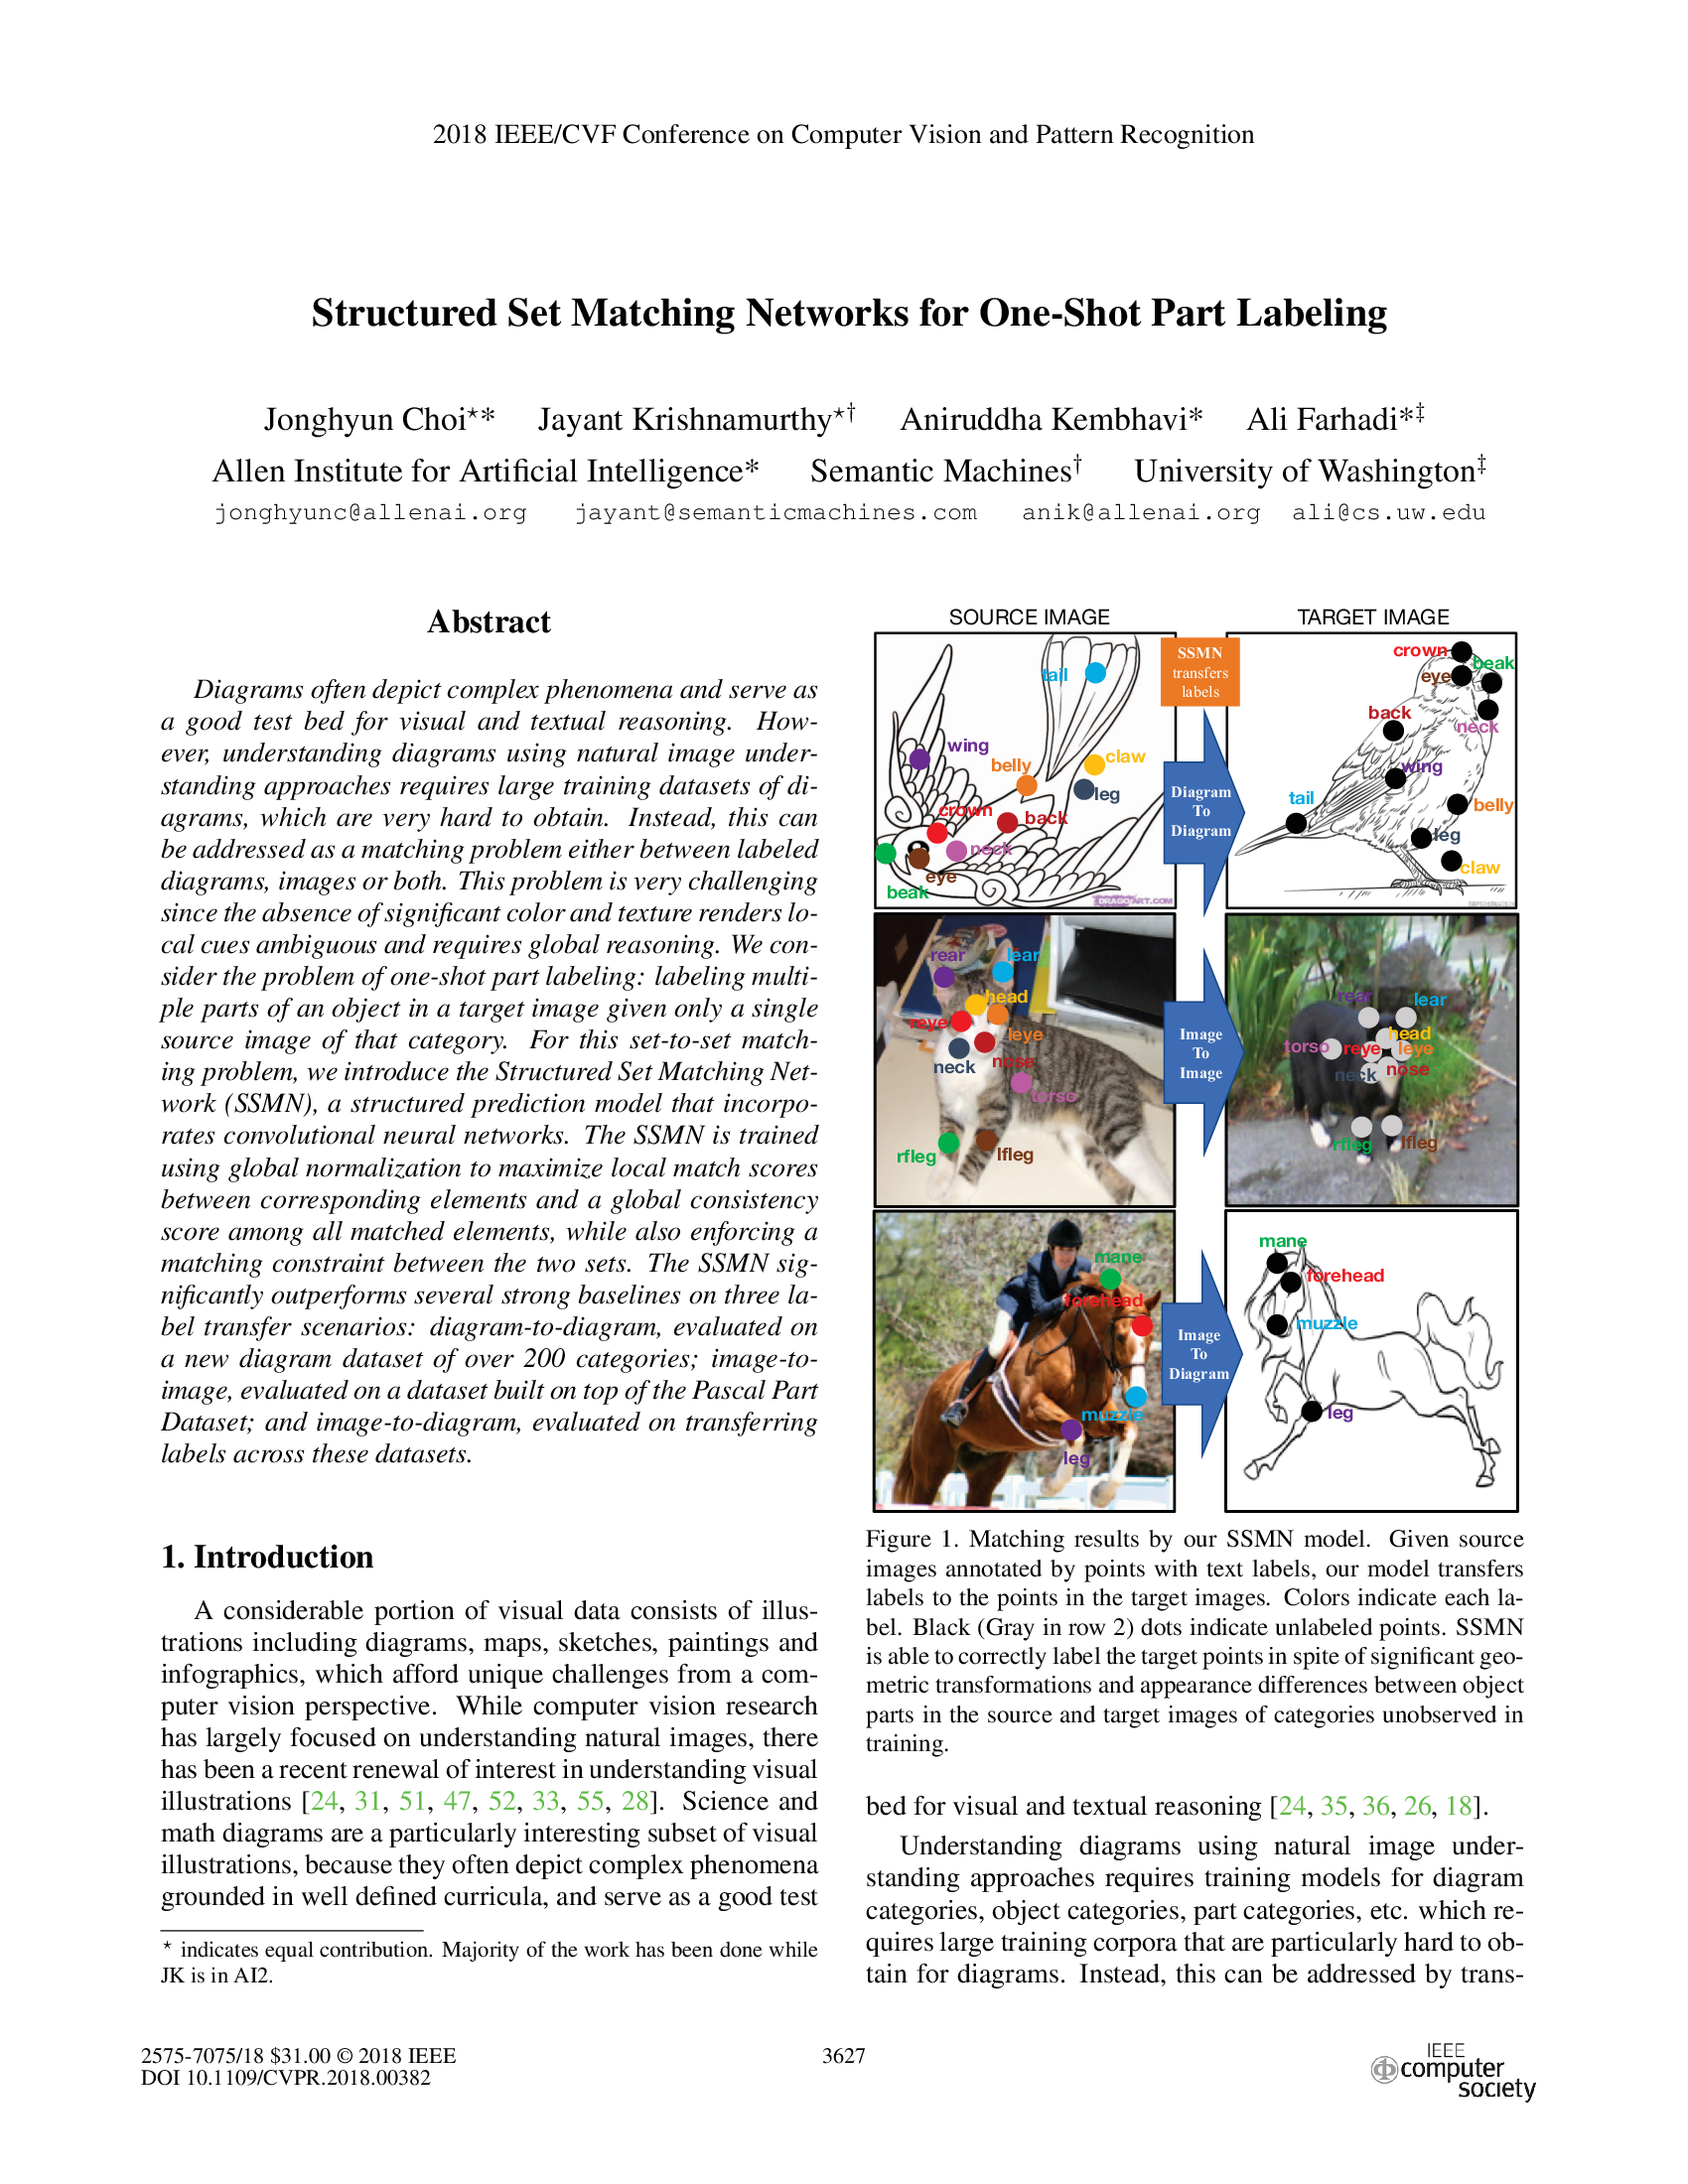 Structured Set Matching Networks for One-Shot Part Labeling